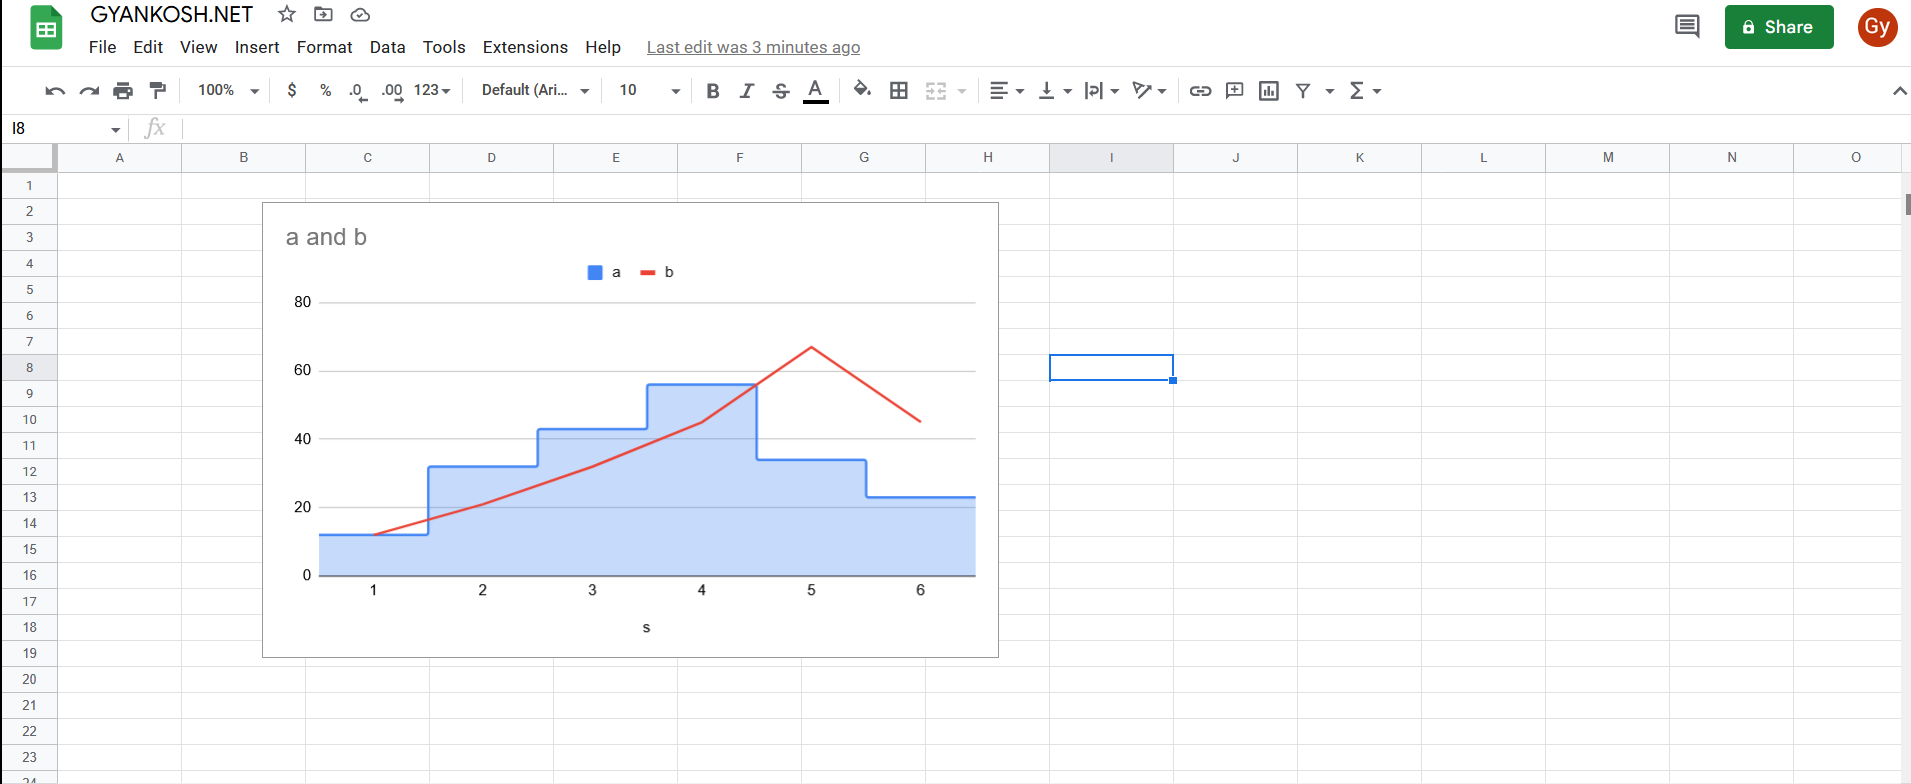 HOW TO MAKE DATA LABELS VISIBLE IN COMBO CHARTS IN GOOGLE SHEETS